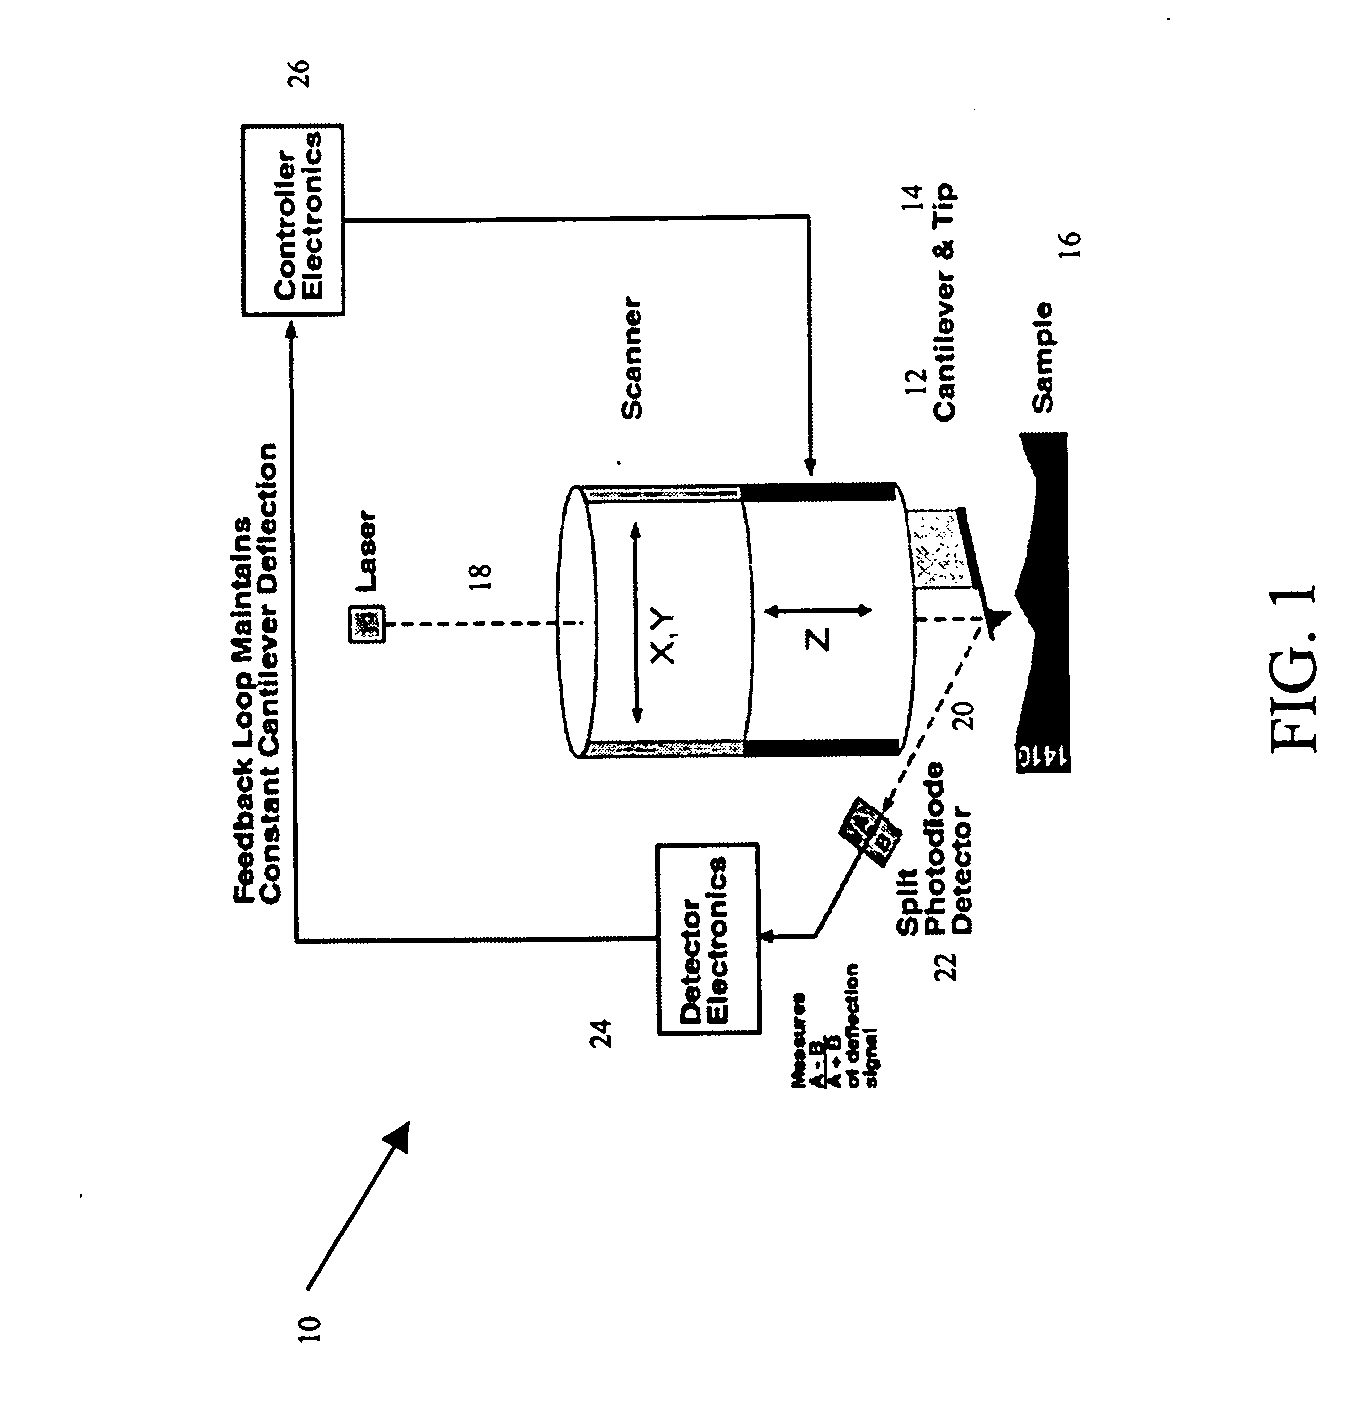 System and method for the analysis of atomic force microscopy data